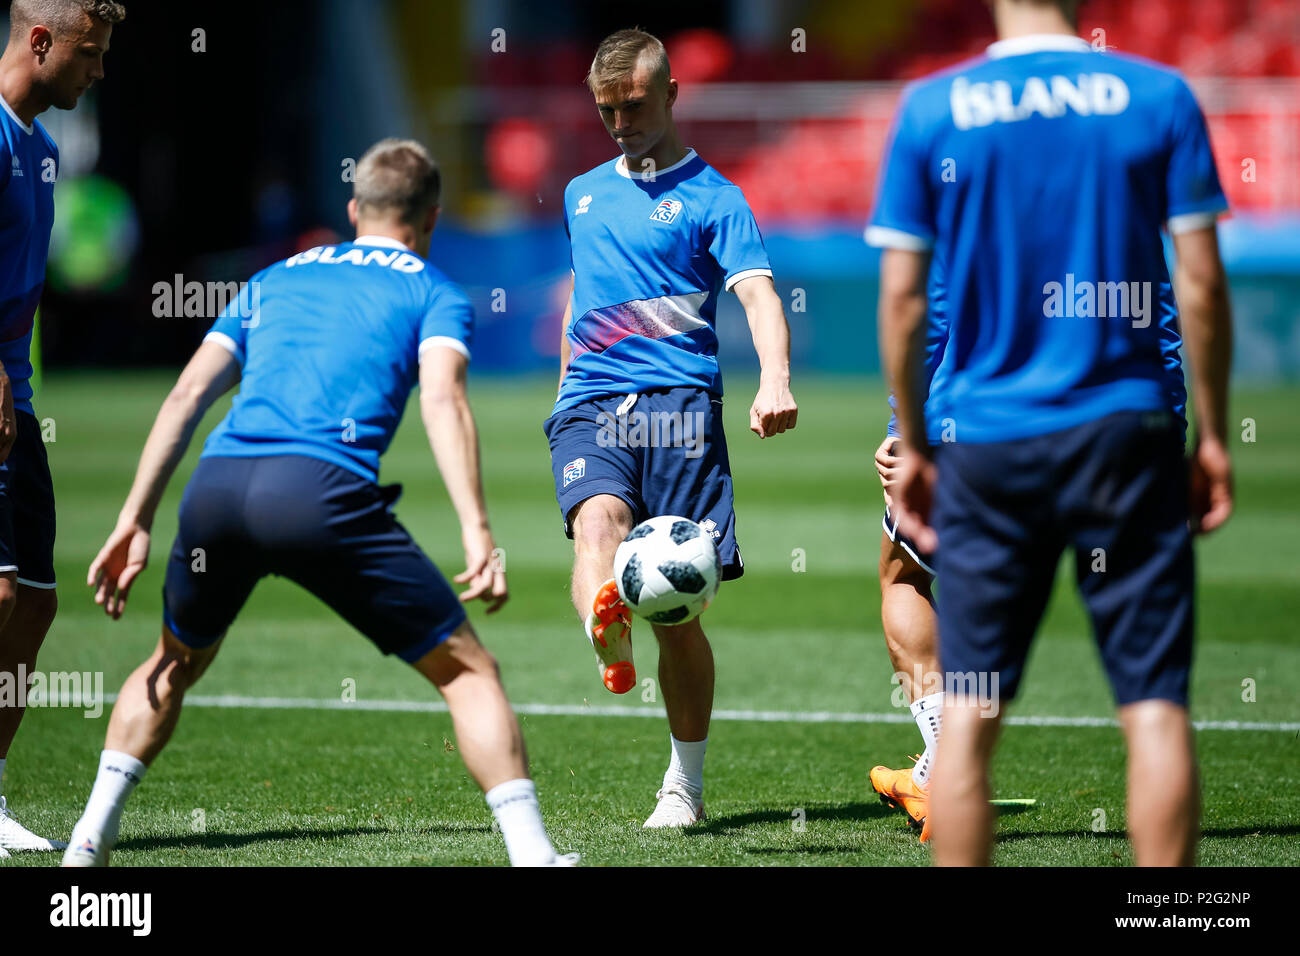 Moscow, Russia. 15th June 2018. Albert Gudmundsson of Iceland during an Iceland training session, prior to their 2018 FIFA World Cup Group D match against Argentina, at Spartak Stadium on June 15th 2018 in Moscow, Russia. Credit: PHC Images/Alamy Live News Stock Photo